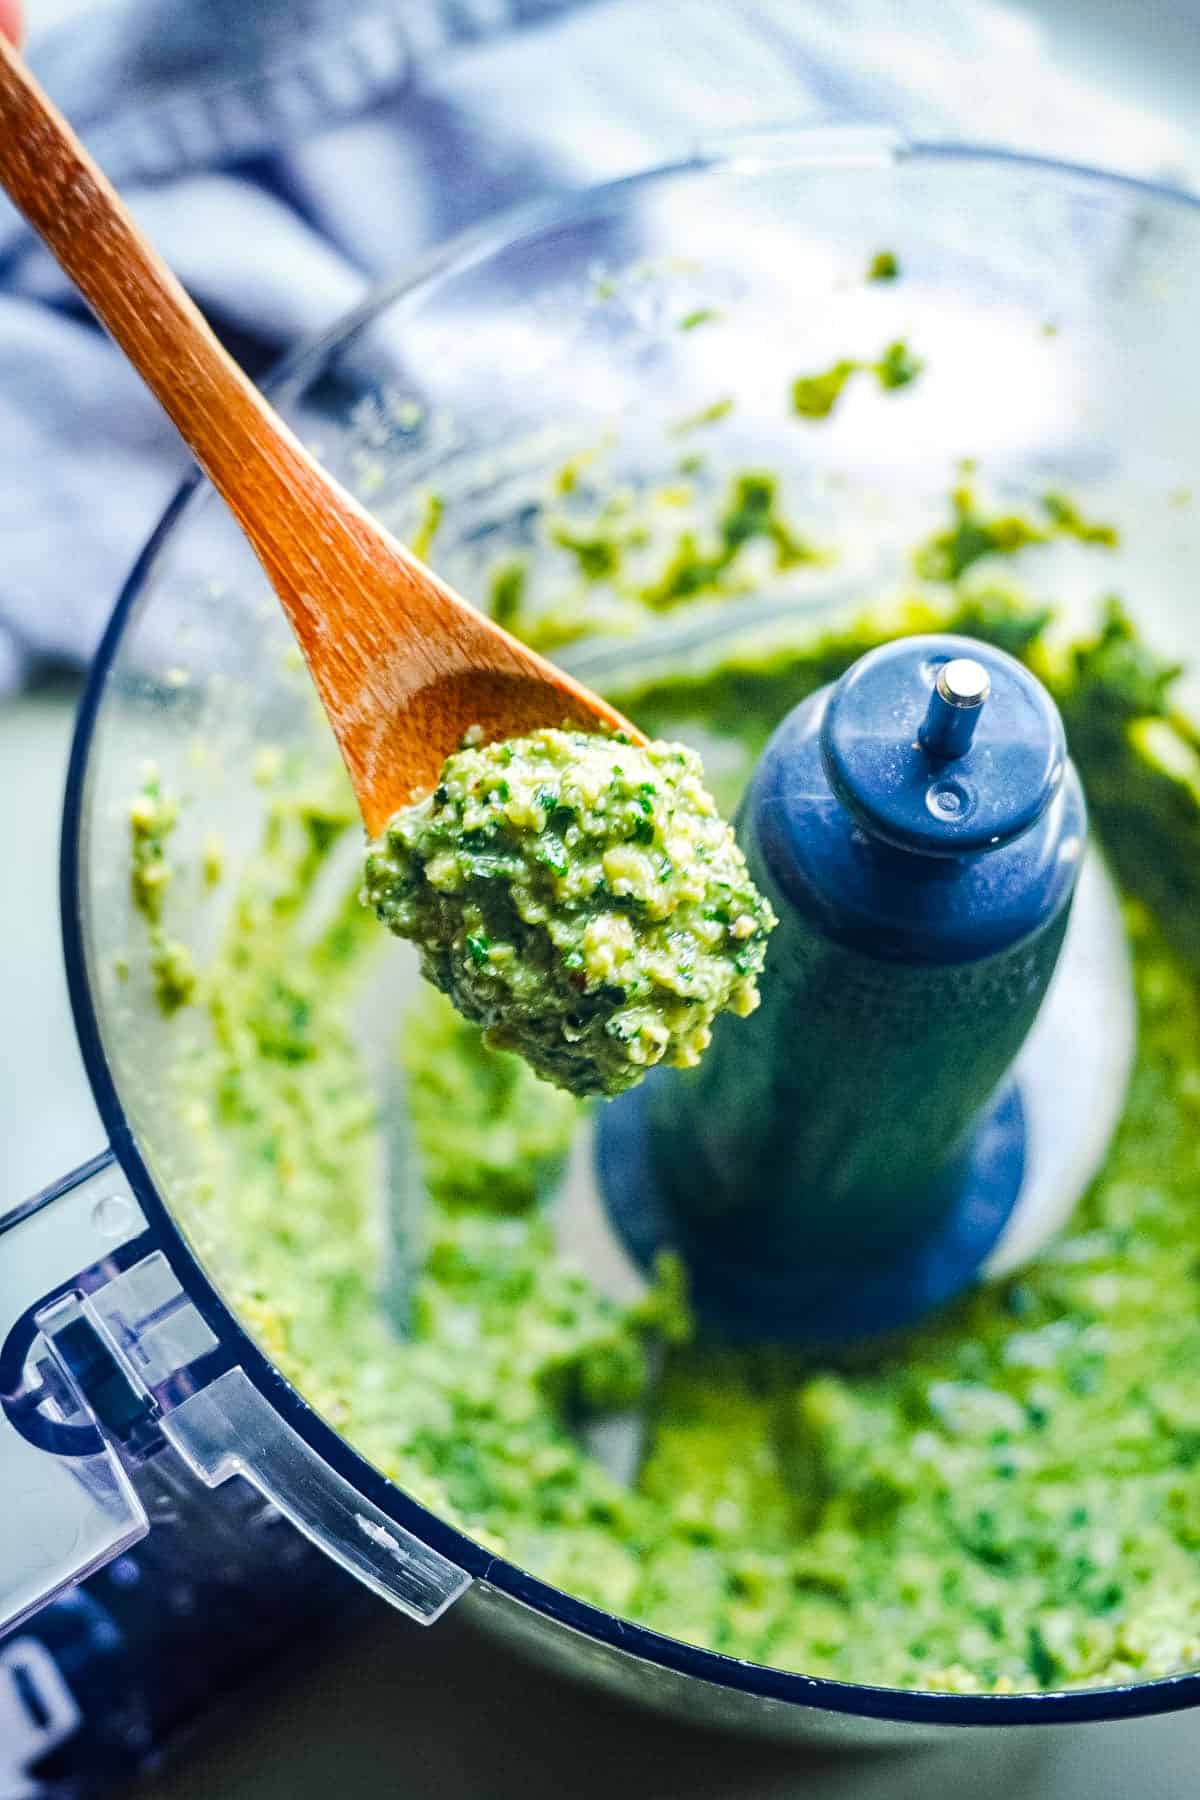 A wooden spoon picking up some walnut basil pesto fresh from the blender.